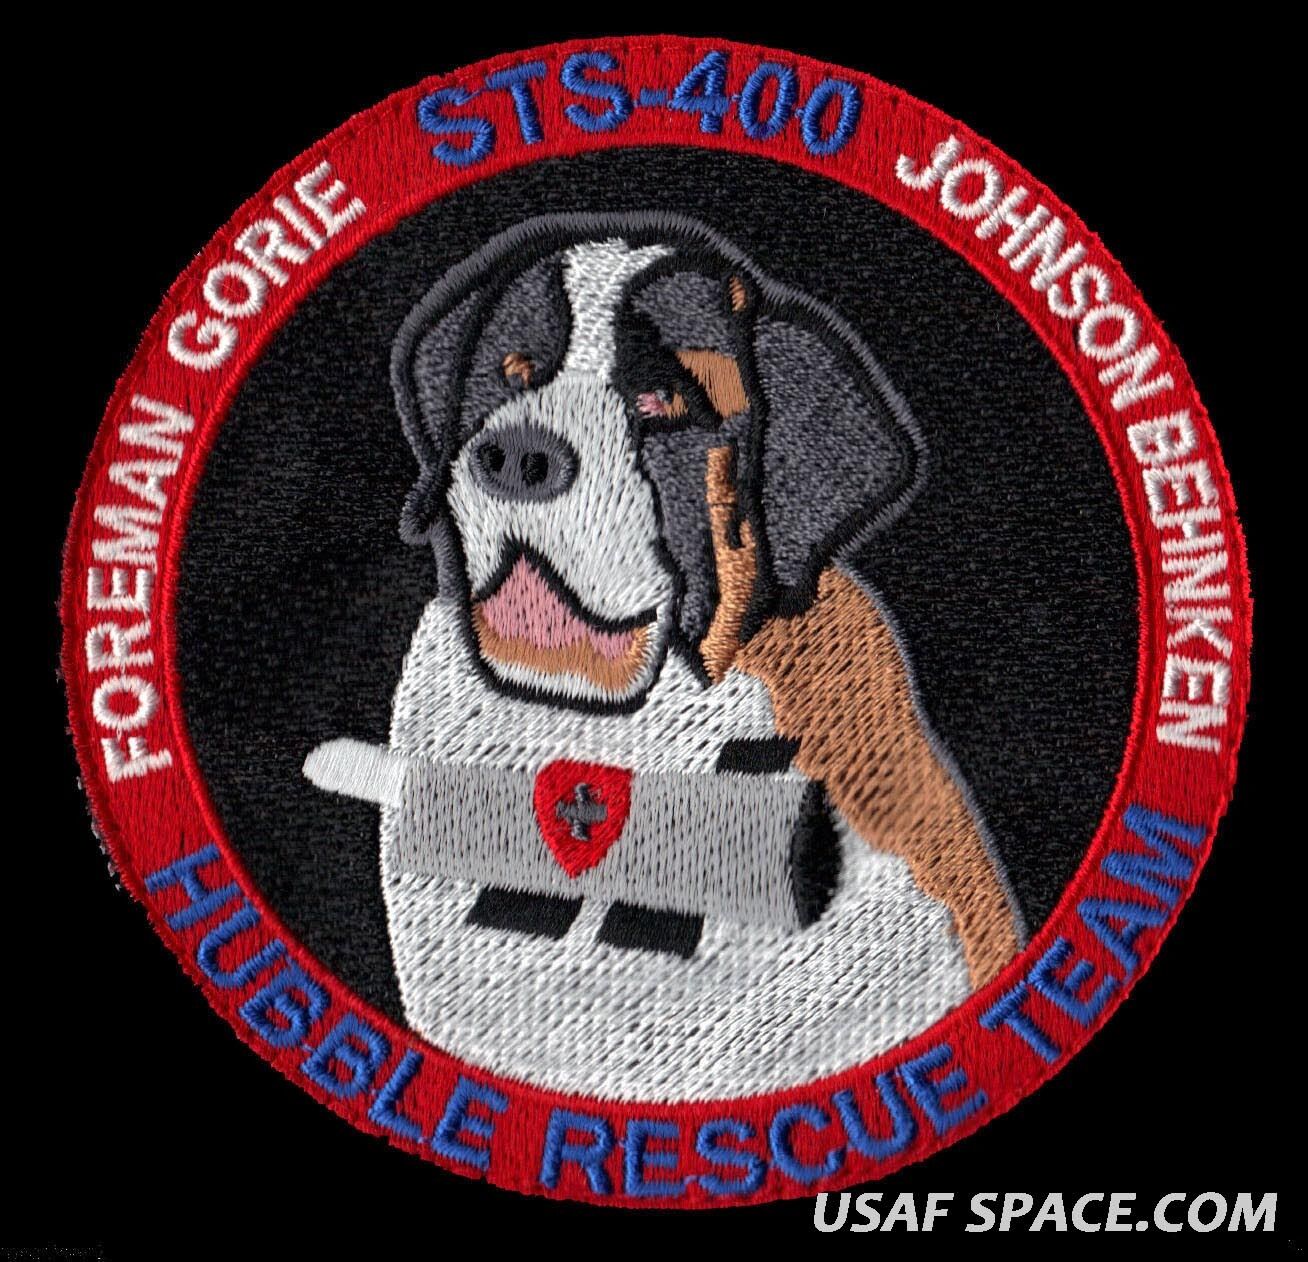 HUBBLE RESCUE TEAM  STS-400 Mission NASA SPACE SHUTTLE  4